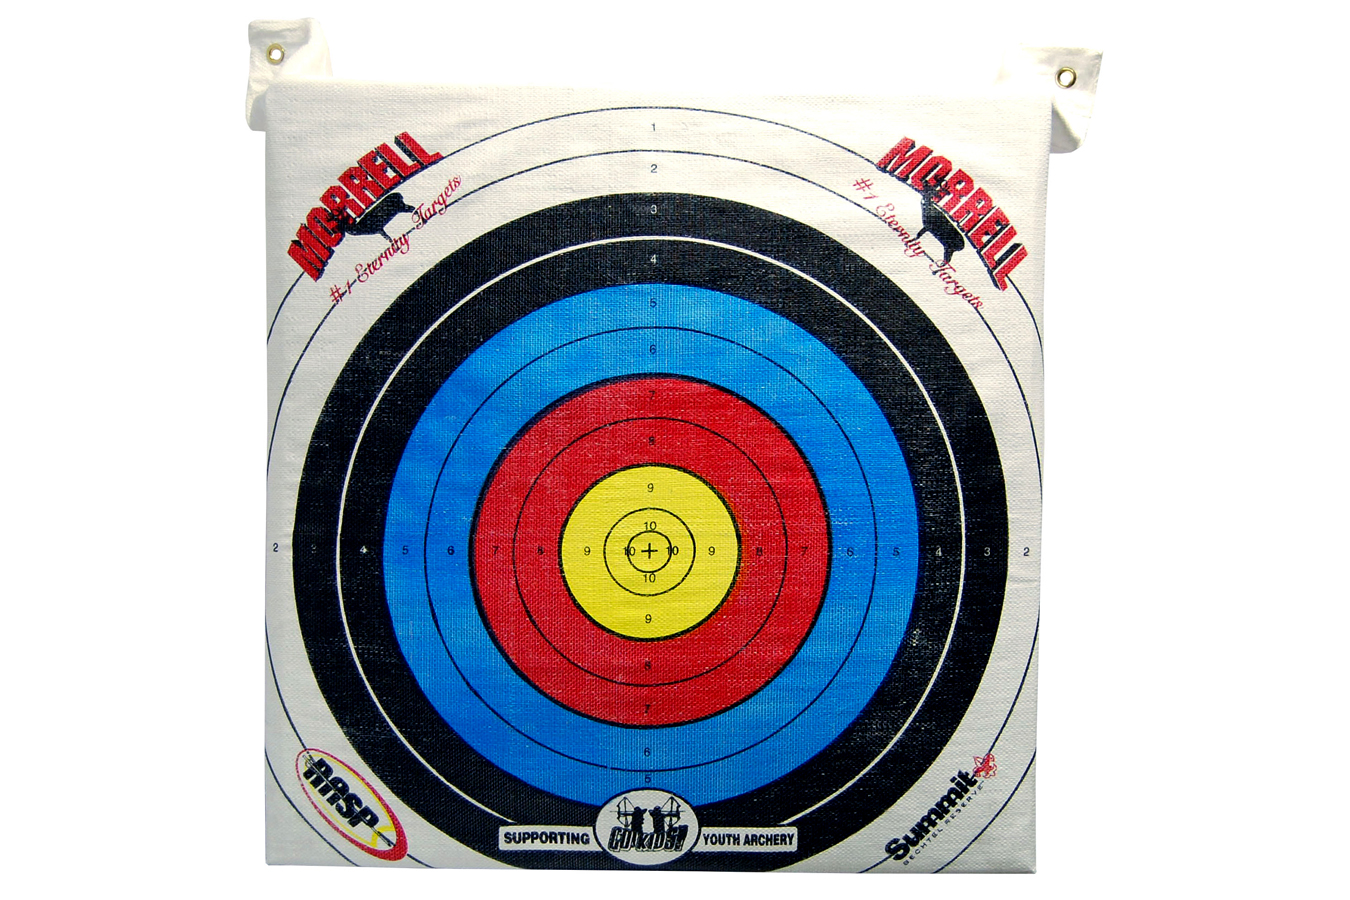 MORRELL NASP YOUTH ARCHERY TARGET